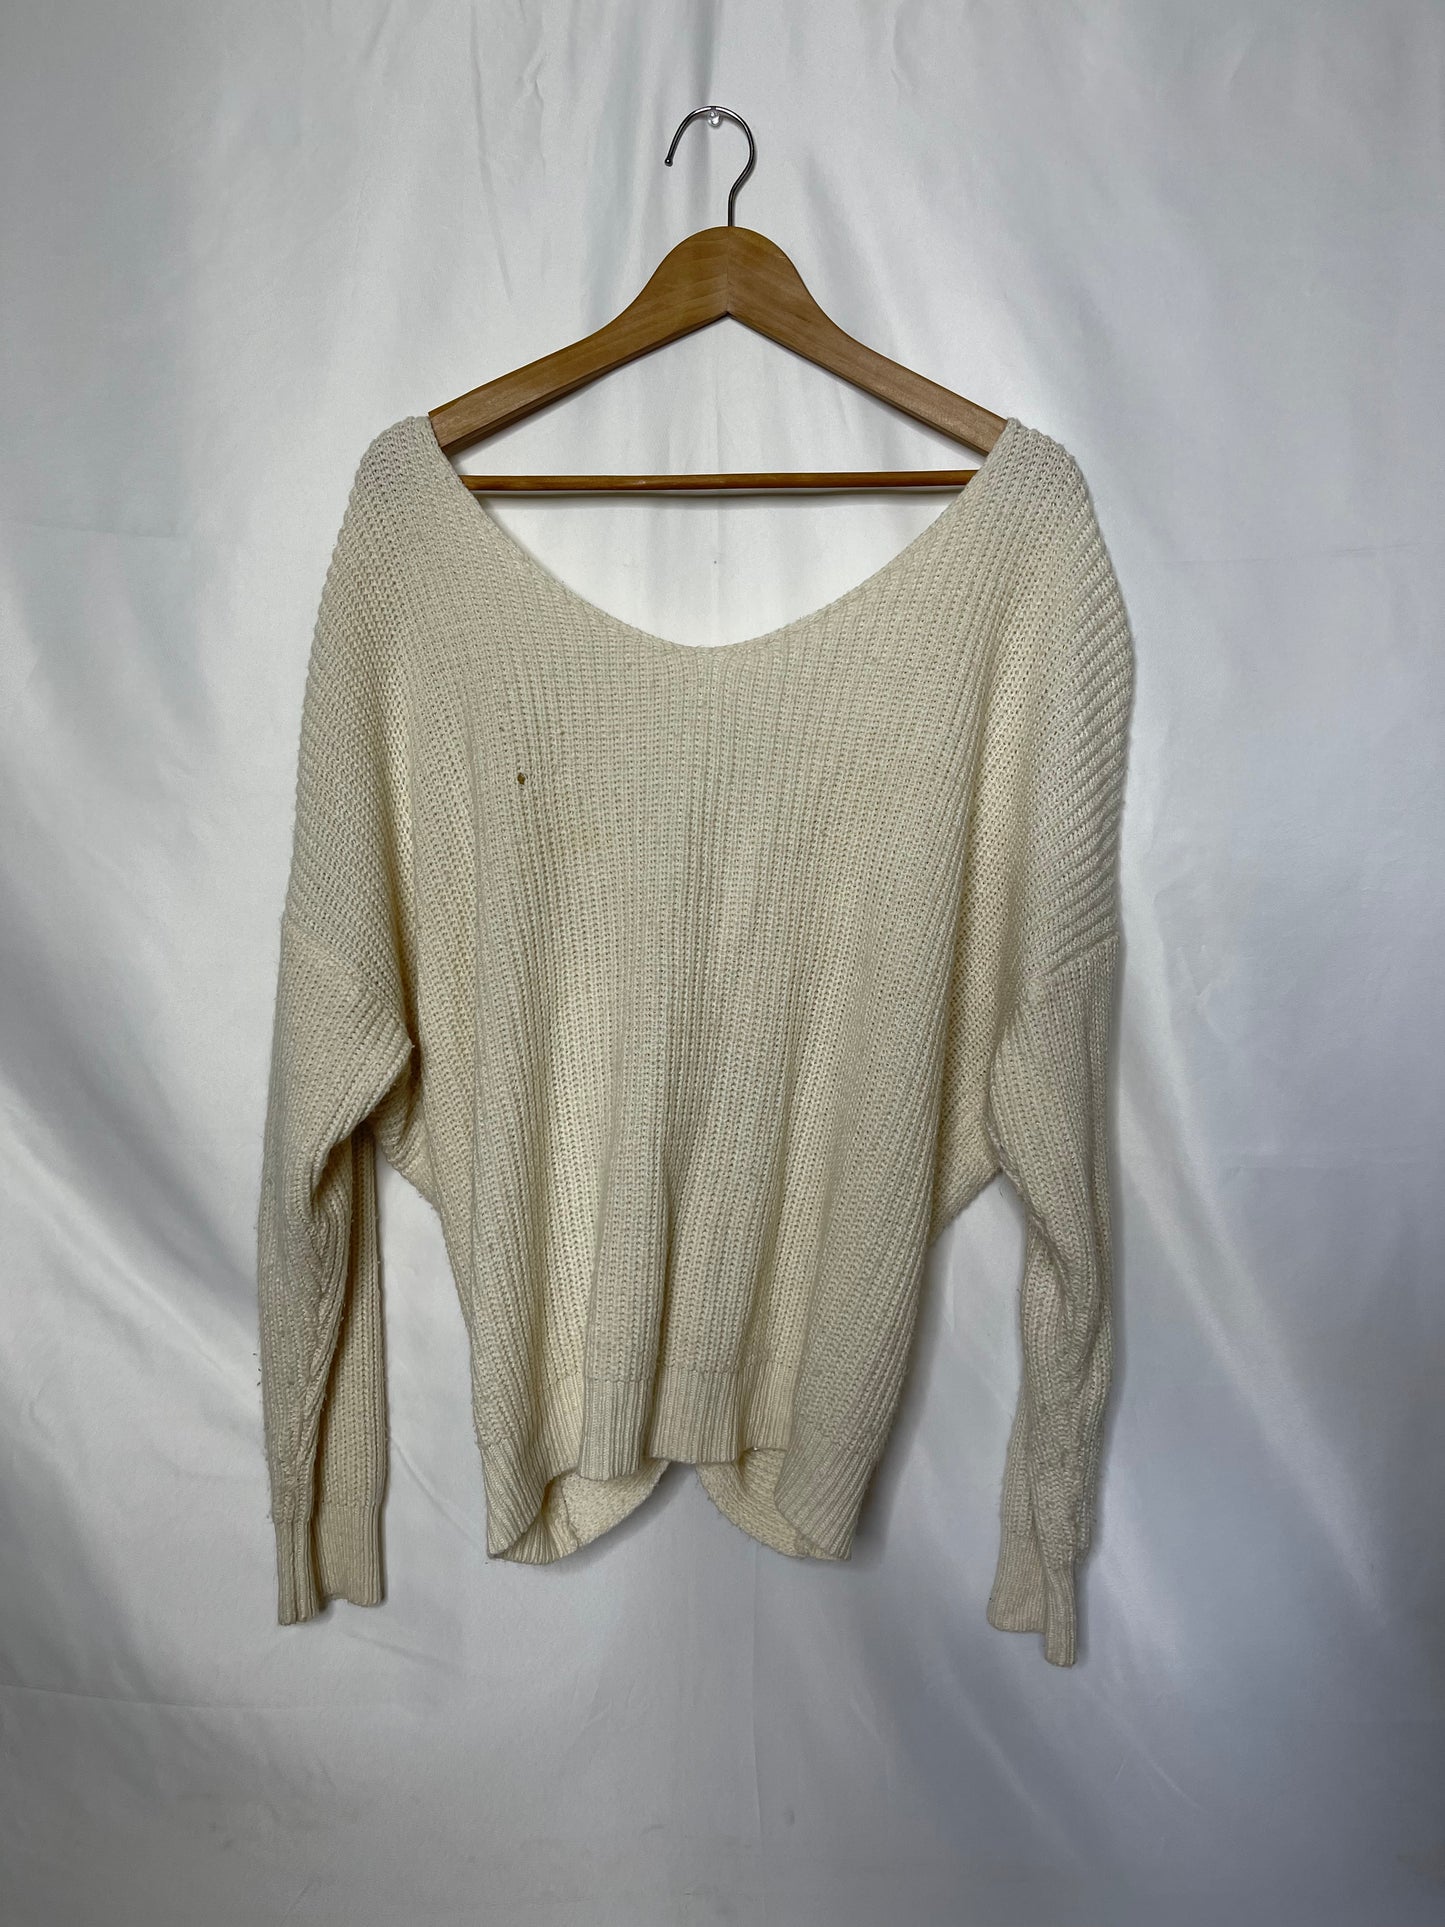 2x Off White Knit sweater Top